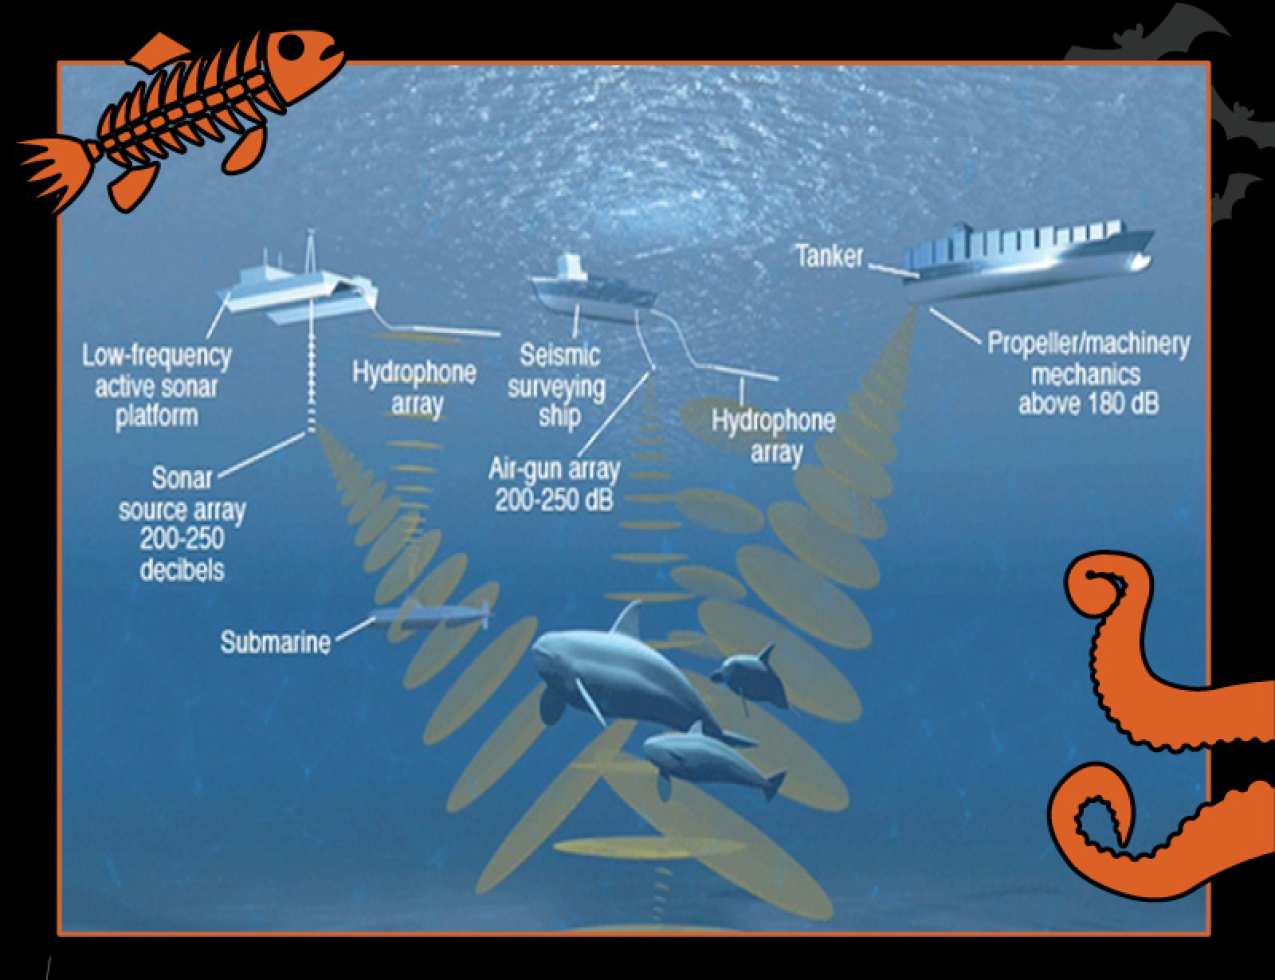 A diagram describing an acoustic buoy and the parts and components involved in ocean nouse research. Border of the photo is black with orange sea creature graphics of octopus tentacles and a fish skeleton. Text: Things that go bump in the sea, #NOAASpookyScience with NOAA logo.